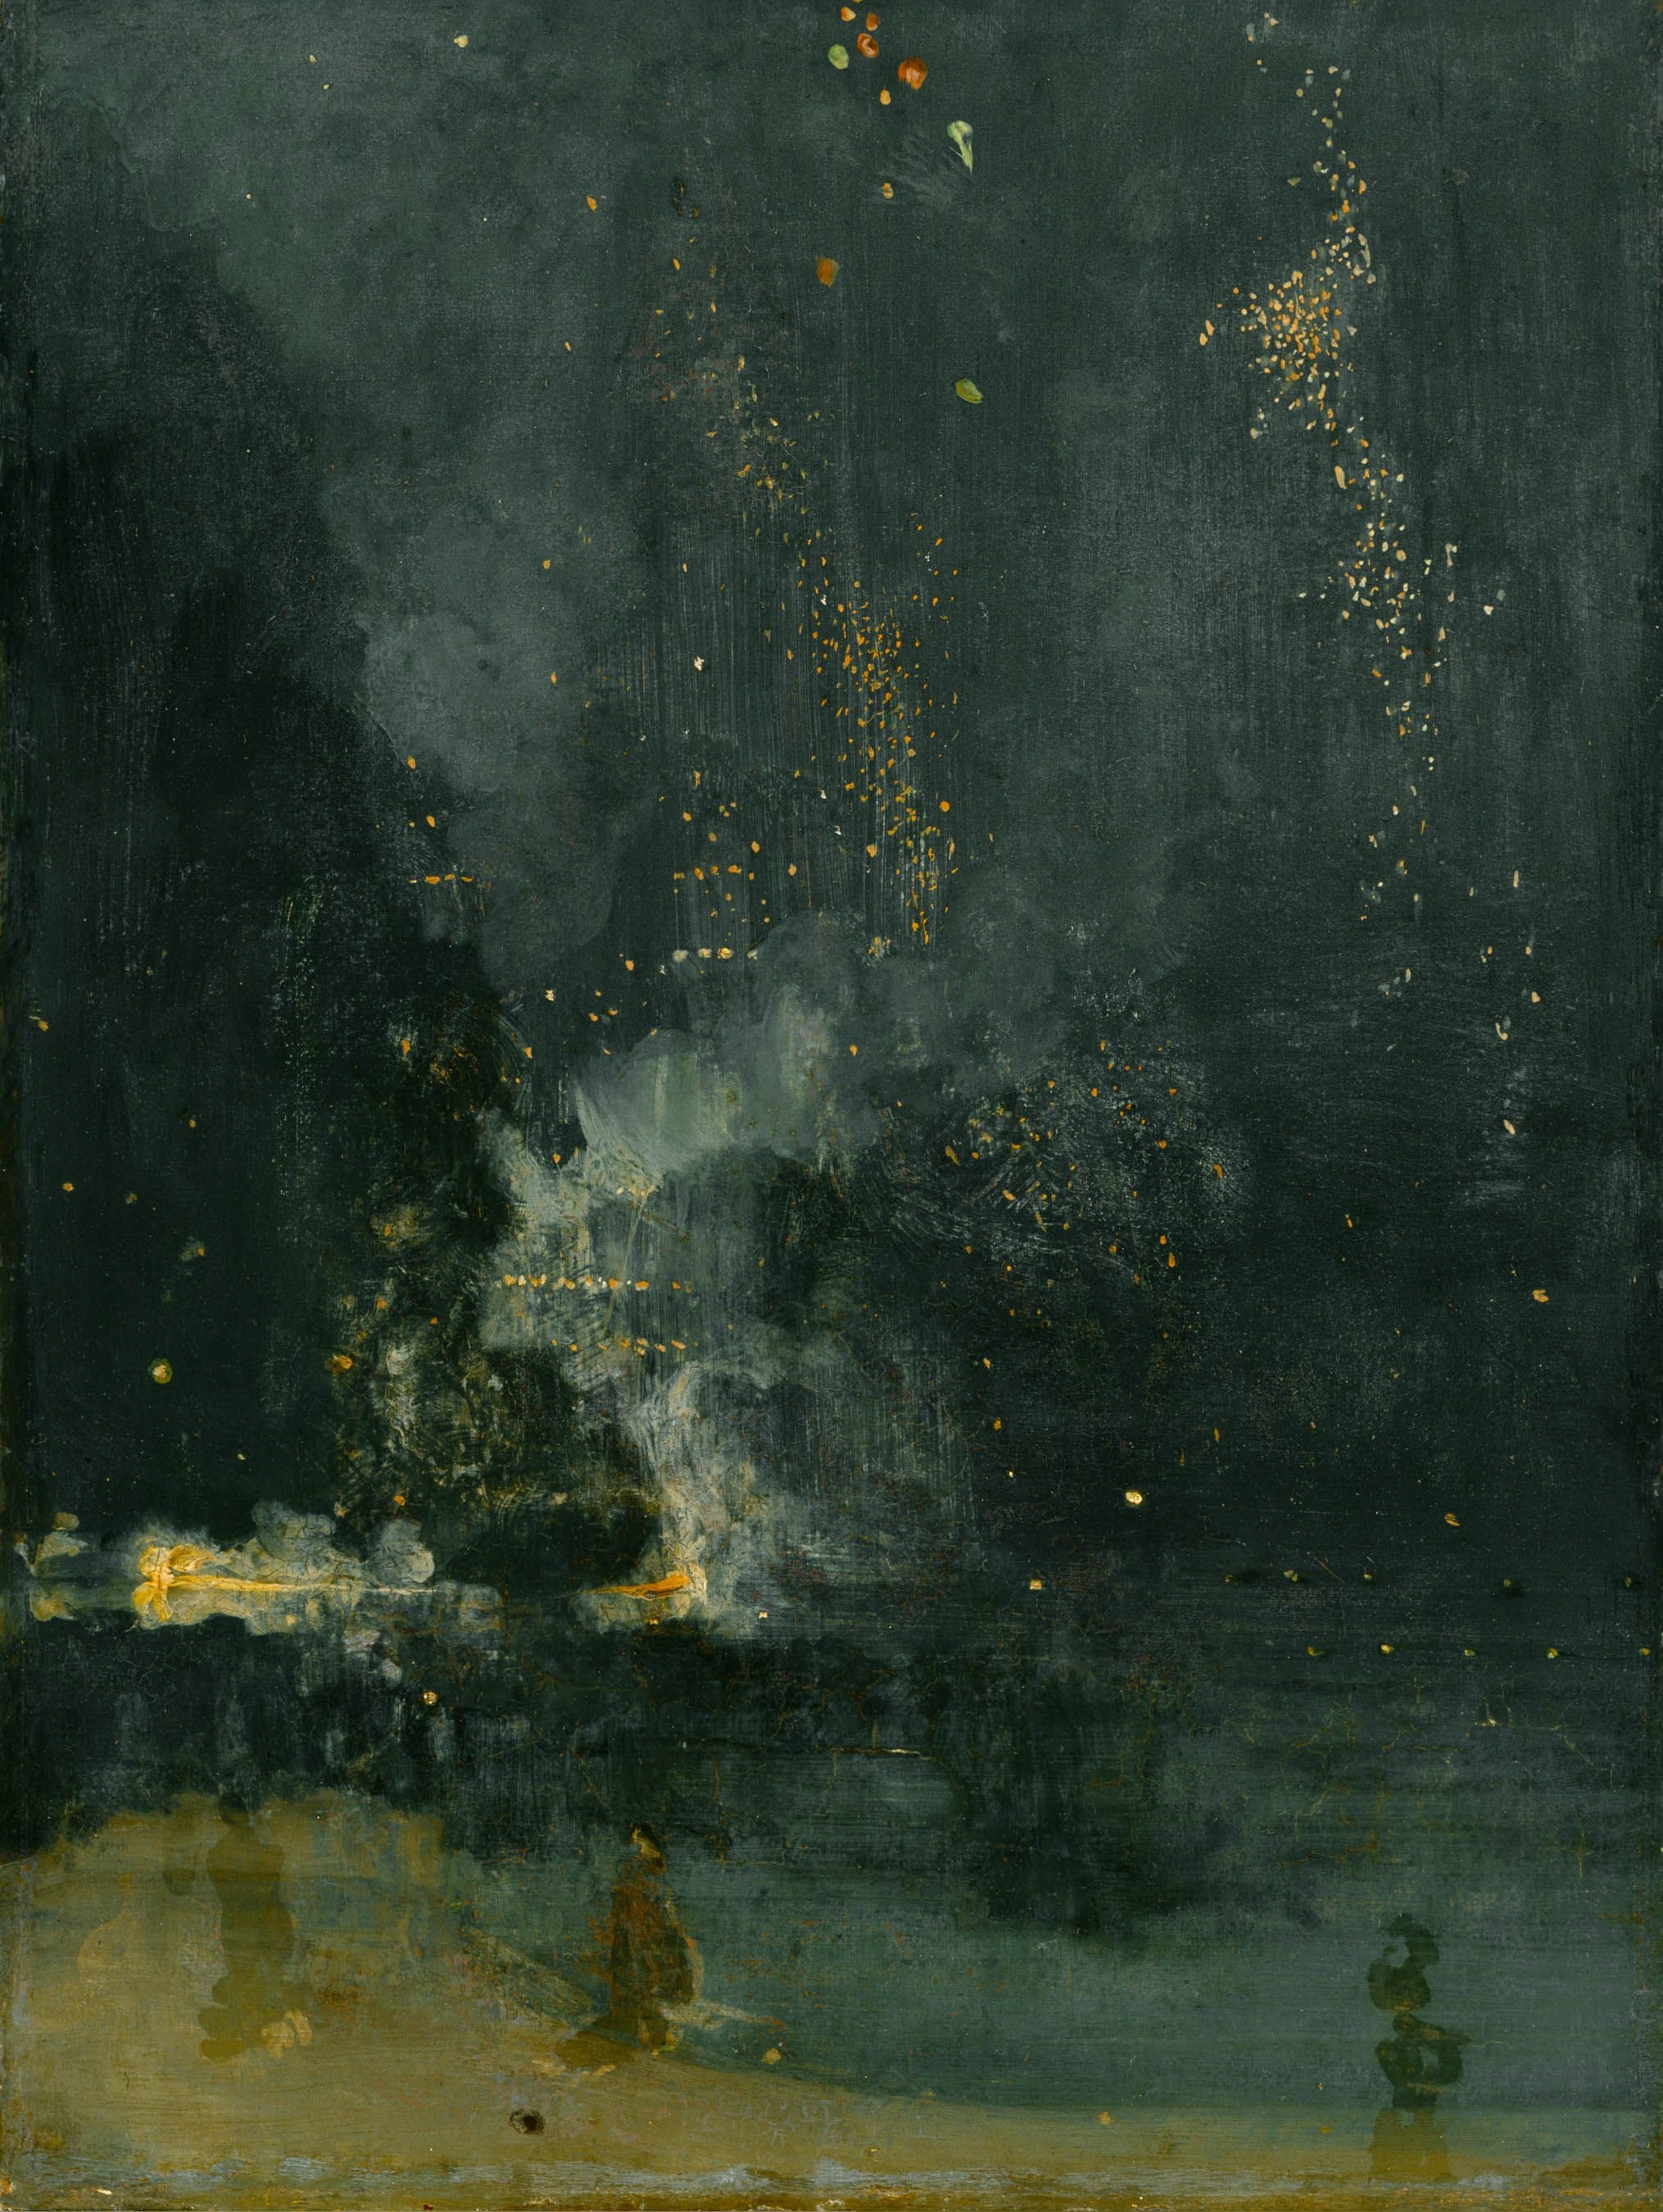 Nocturne in Black and Gold by James Abbott McNeill Whistler - circa 1872–77 - 60.3 × 46.6 cm Detroit Institute of Arts